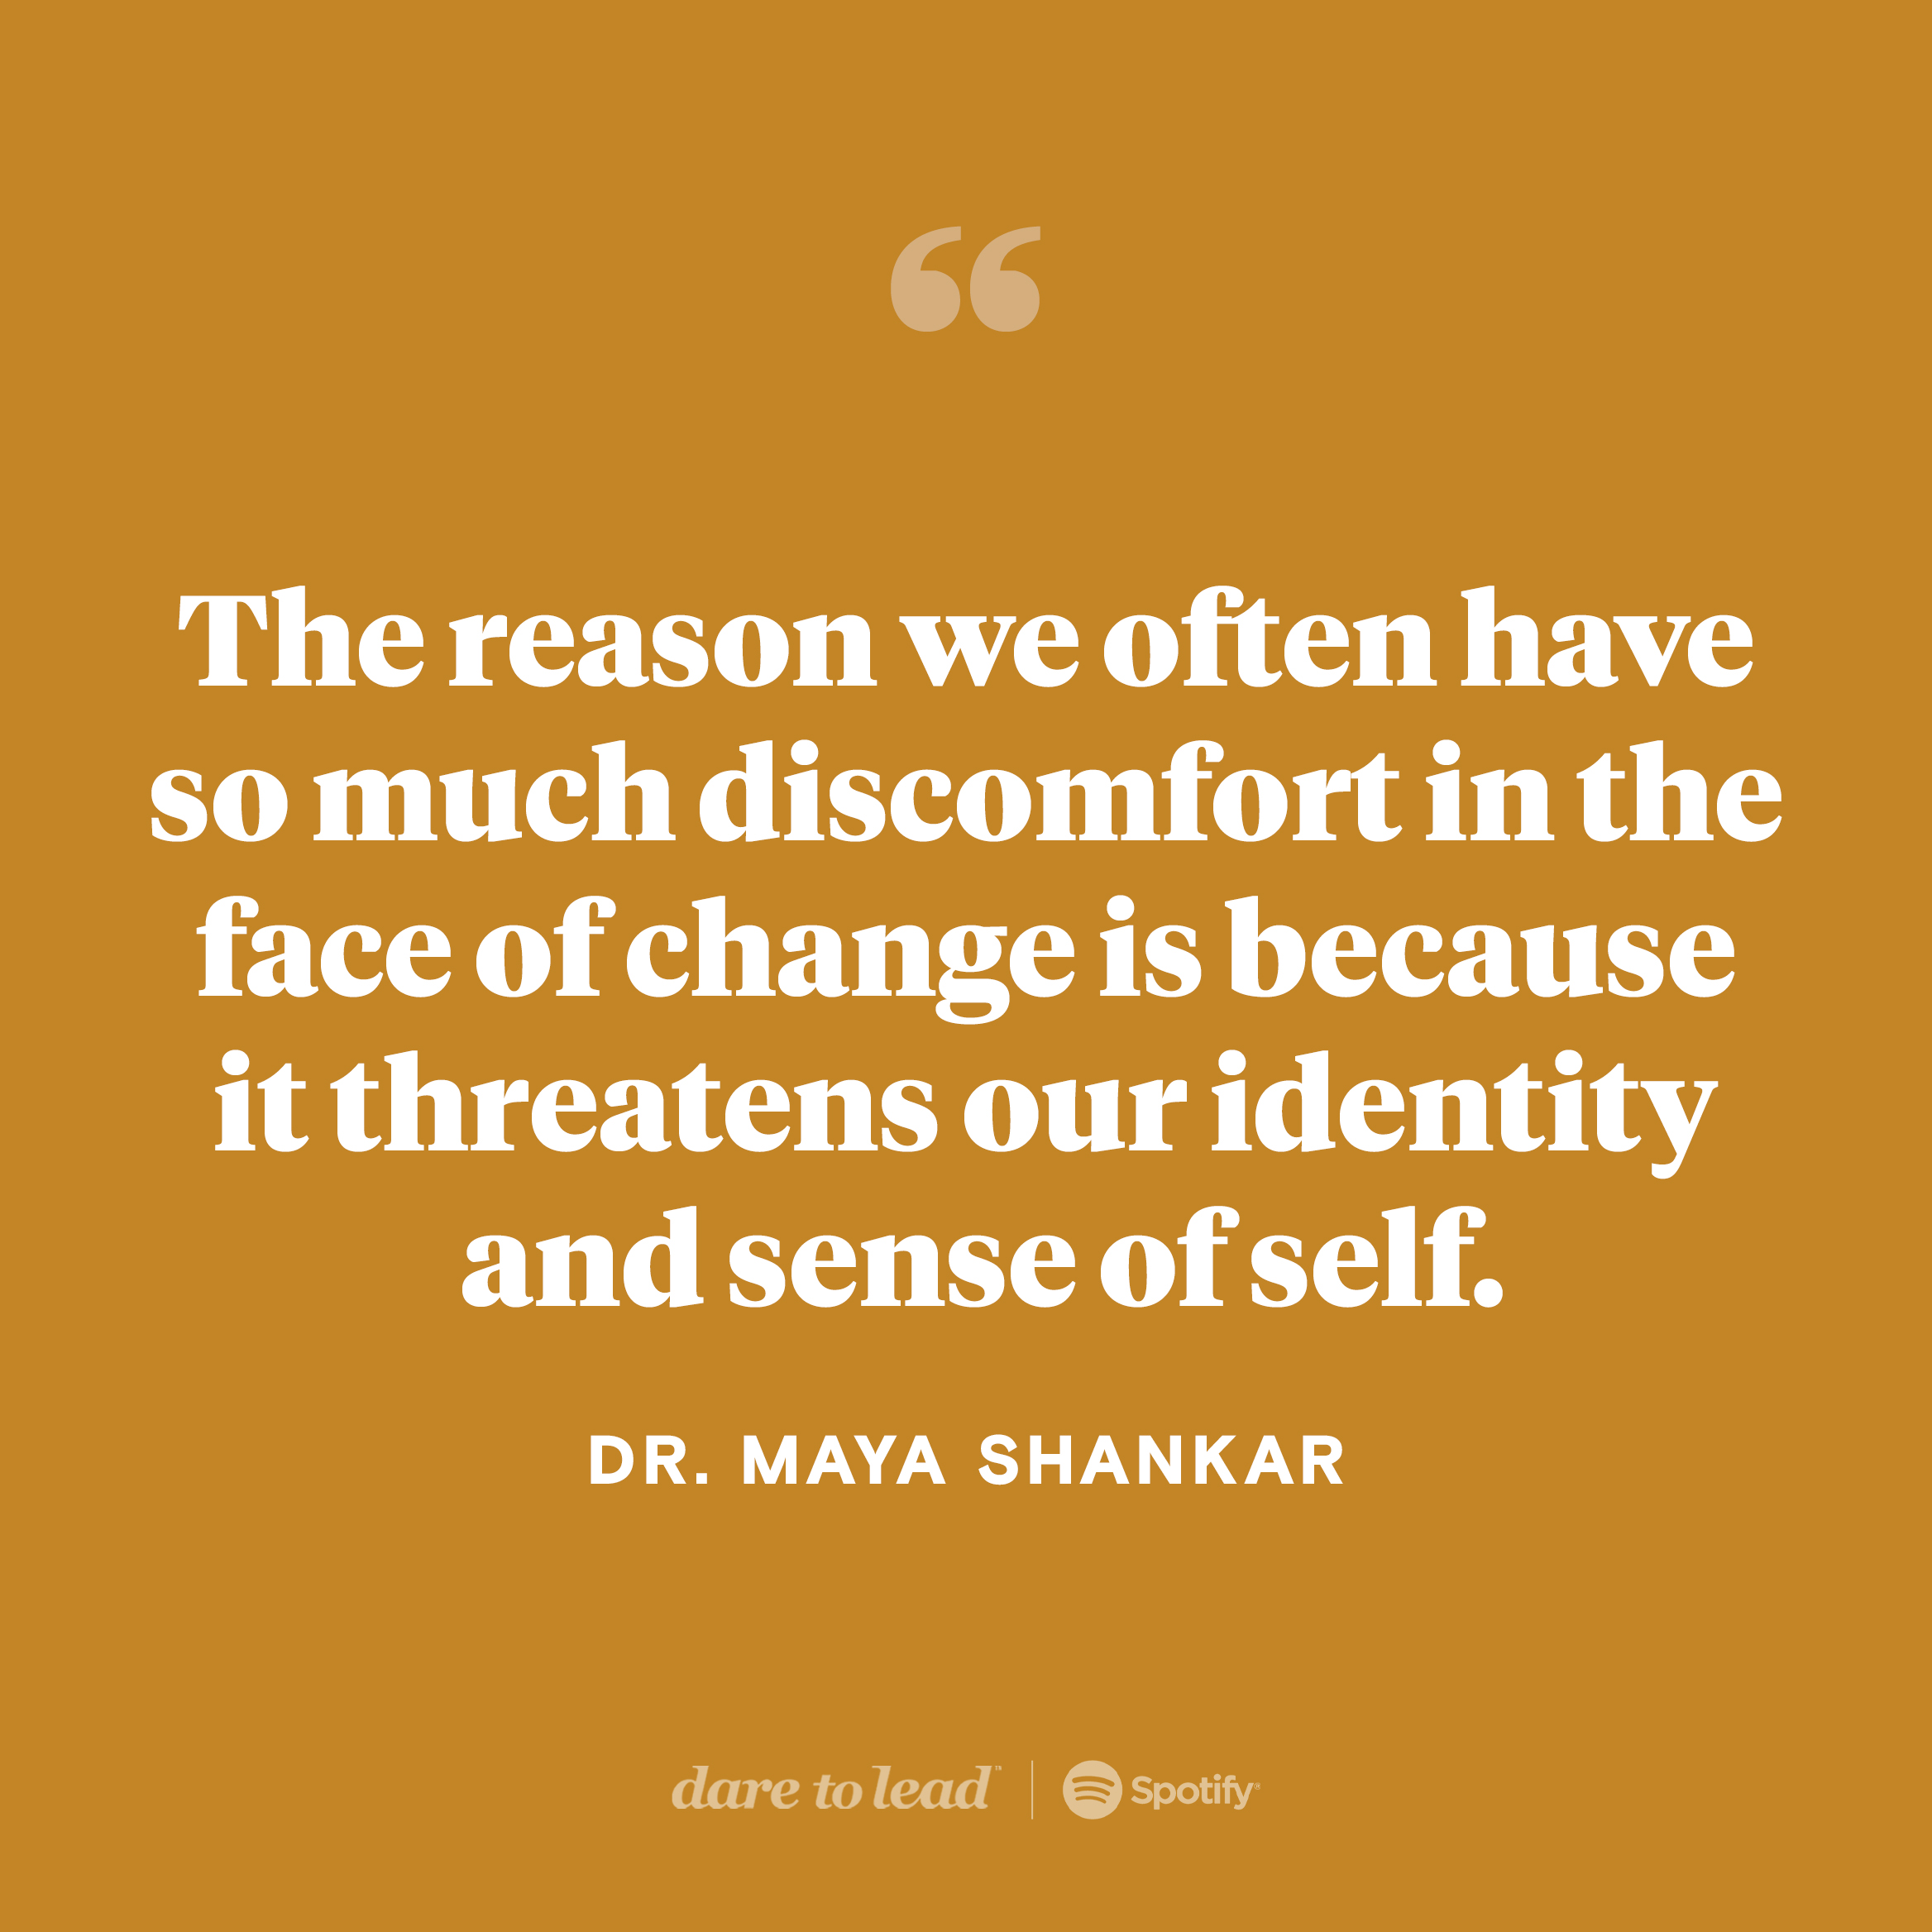 A quote from cognitive scientist Maya Shankar, who appeared on the Dare to Lead podcast with Brené Brown: The reason we often have so much discomfort in the face of change is because it threatens our identity and sense of self.